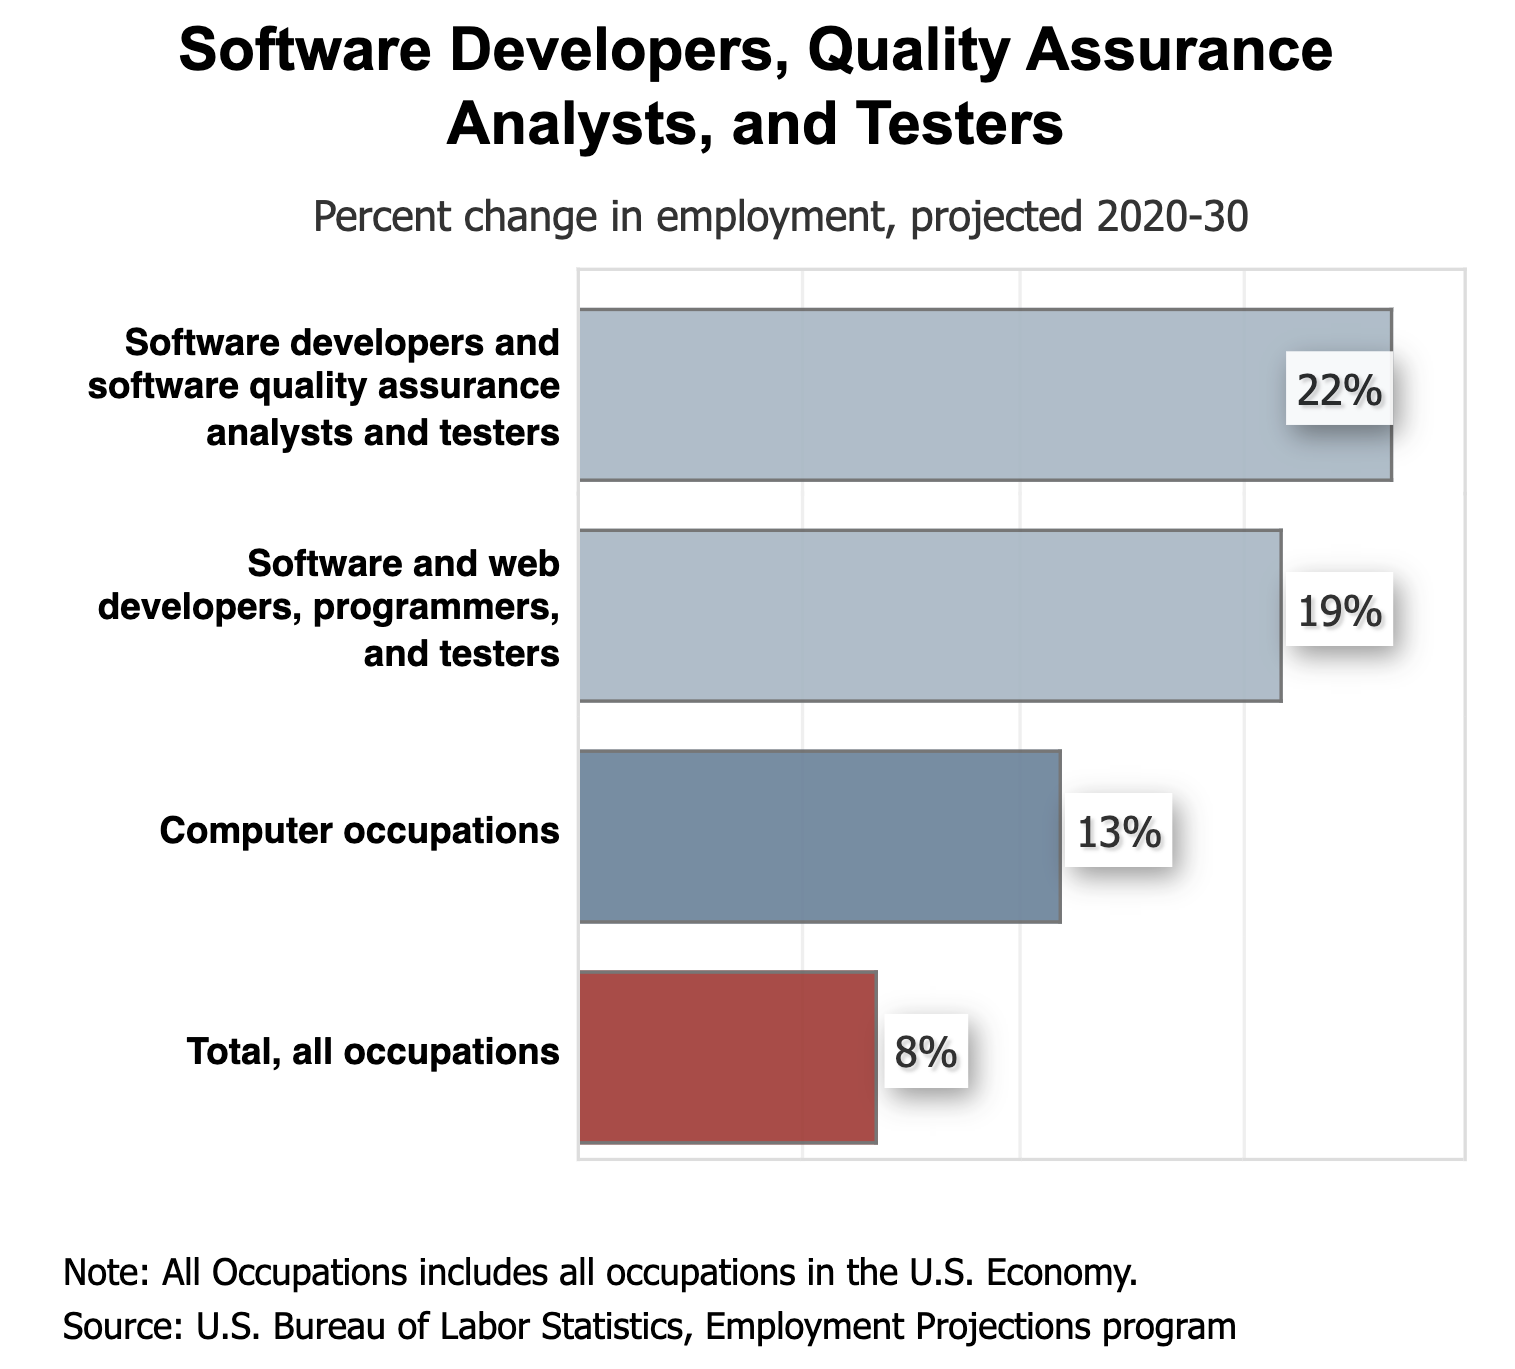 Chart showing employment growth for software developers, quality assurance analysts, and testers.